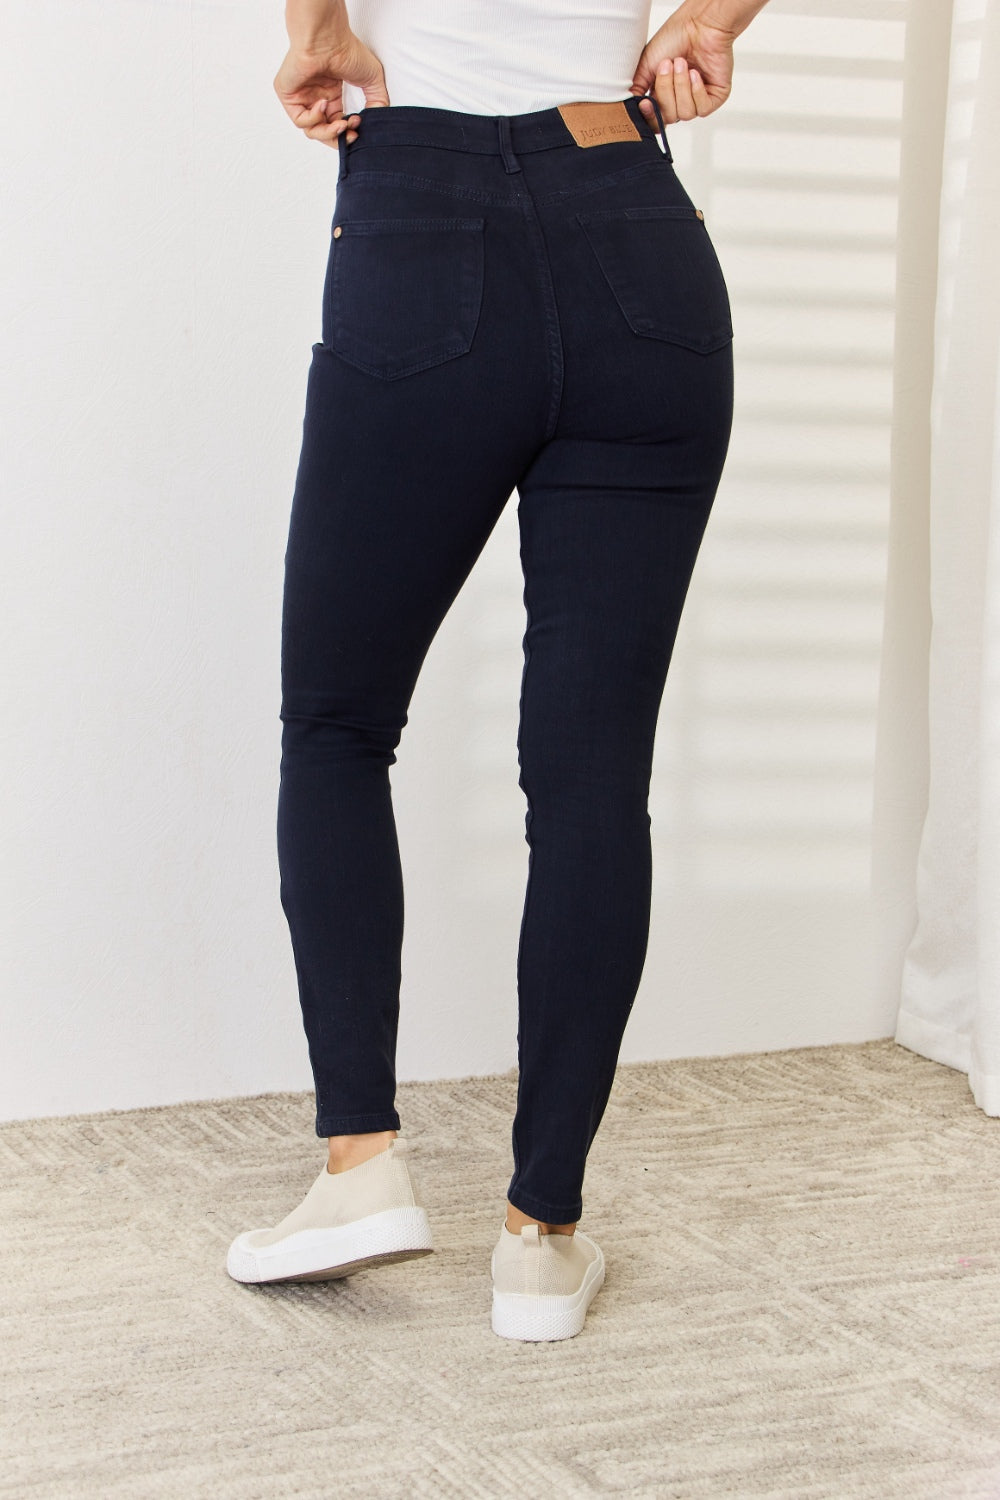 Judy Blue Garment Dyed Tummy Control Skinny Jeans in Navy Southern Soul Collectives